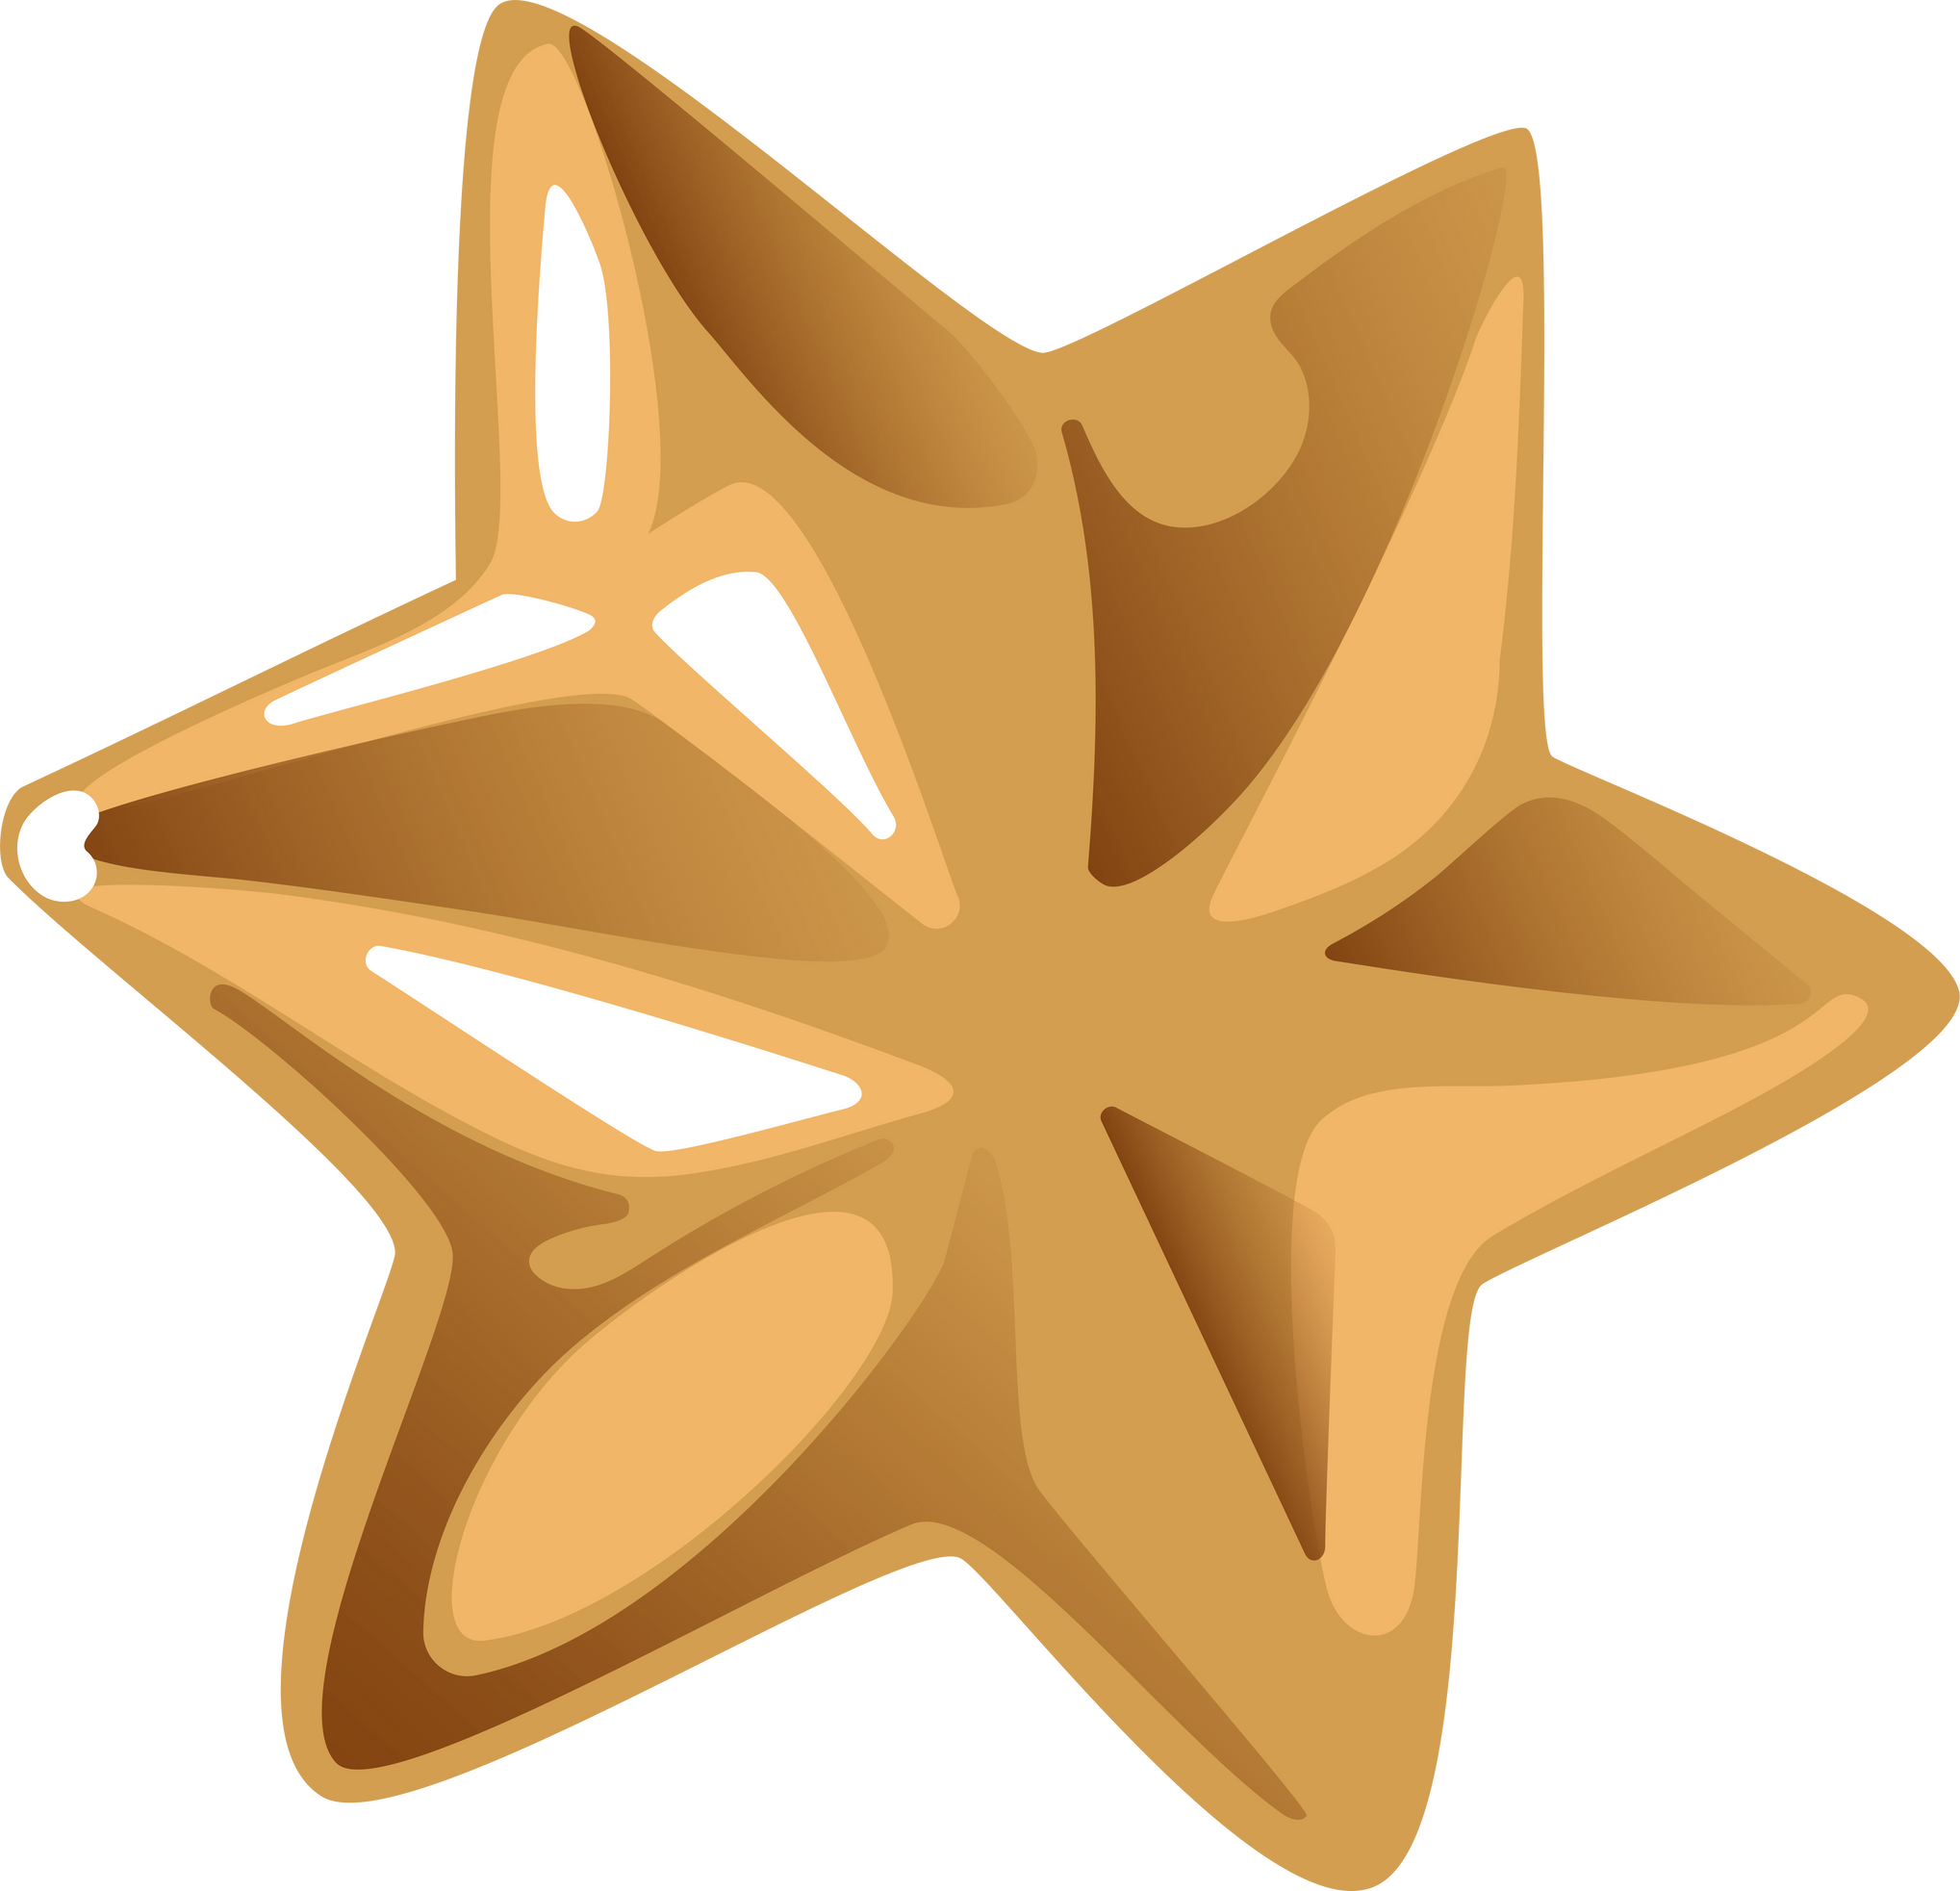 Golden Christmas star in realistic style